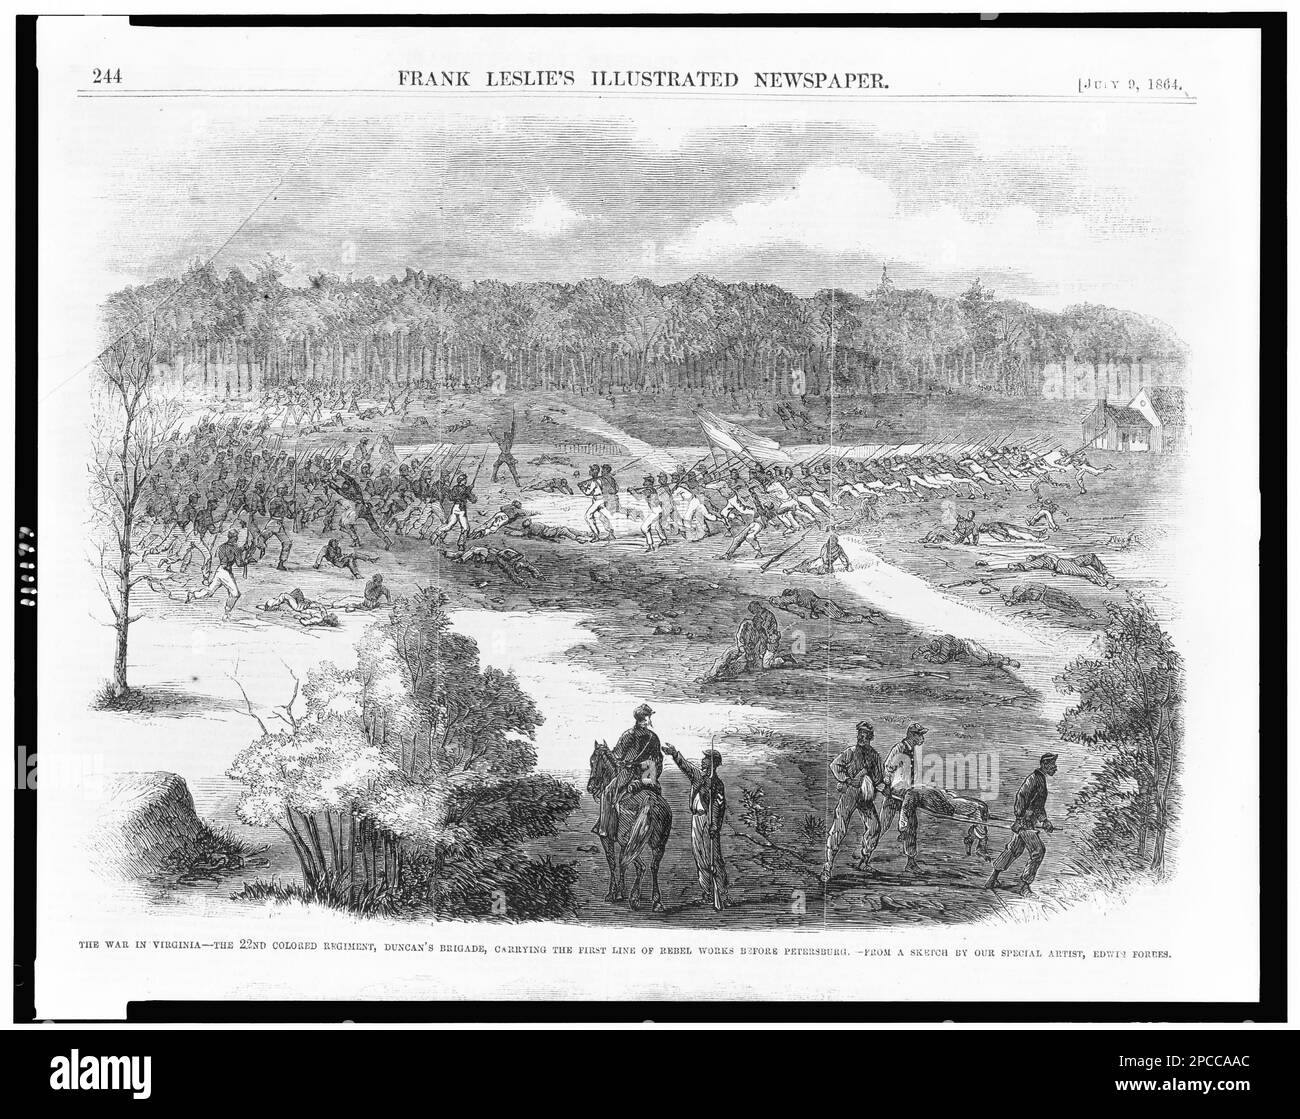 The war in Virginia - the 22nd Colored Regiment, Duncan's brigade, carrying the first line of Rebel works before Petersburg / from a sketch by our special artist, Edwin Forbes.. Illus. in: Frank Leslie's illustrated newspaper, 1864 July 9, p. 244. United States, History, Civil War, 1861-1865, Campaigns & battles, Soldiers, Union, Virginia, Petersburg, 1860-1870, Soldiers, Confederate, Virginia, Petersburg, 1860-1870, African Americans, Military service, 1860-1870. Stock Photo